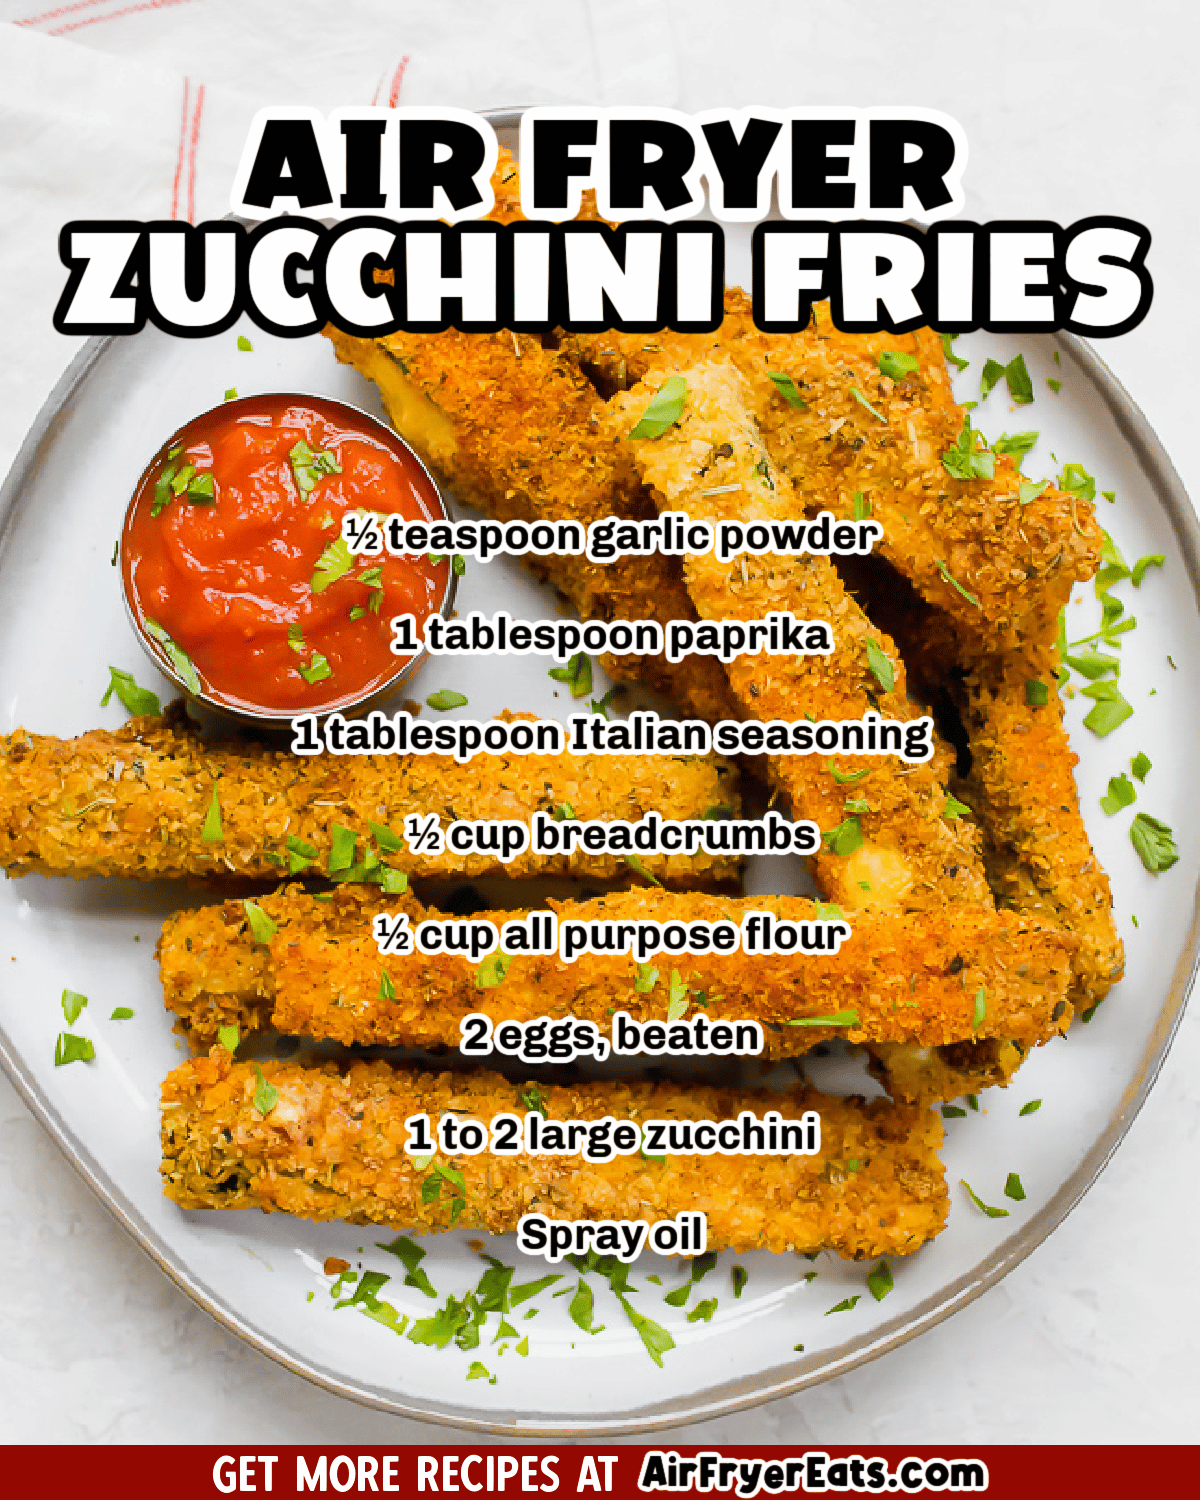 Air Fryer Zucchini Fries are a quick and easy healthy side dish! A few basic pantry ingredients turns your fresh zucchini into delicious, crunchy fries. #vegetarian #airfryer #zucchinifries via @vegetarianmamma